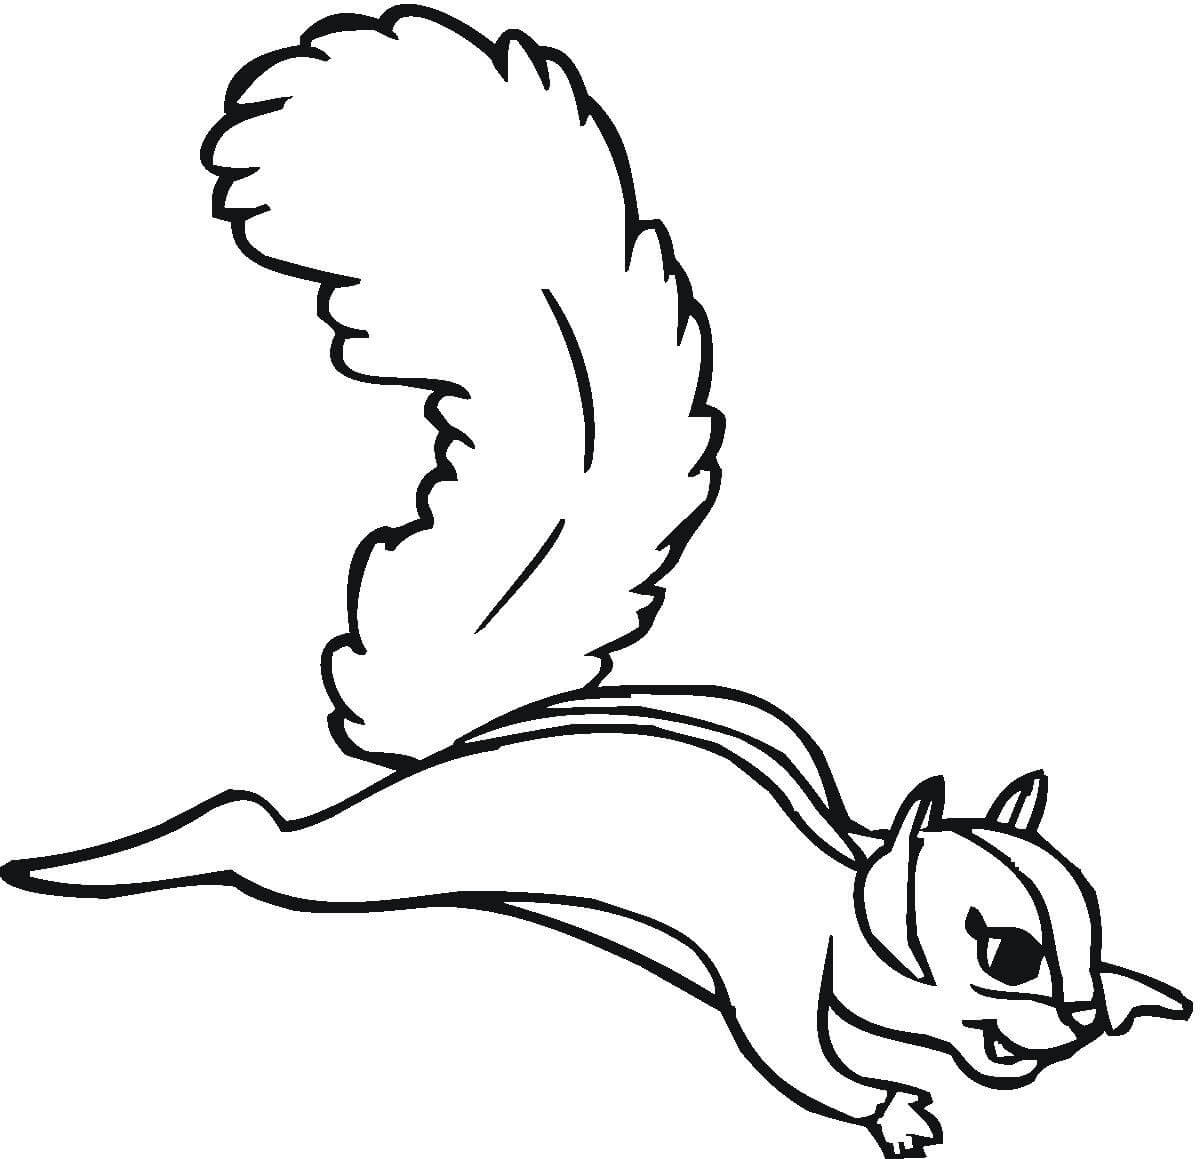 50 pictures of the most beautiful squirrels for children to tap to 7 - 50+ best coloring pictures of squirrels for children to practice coloring